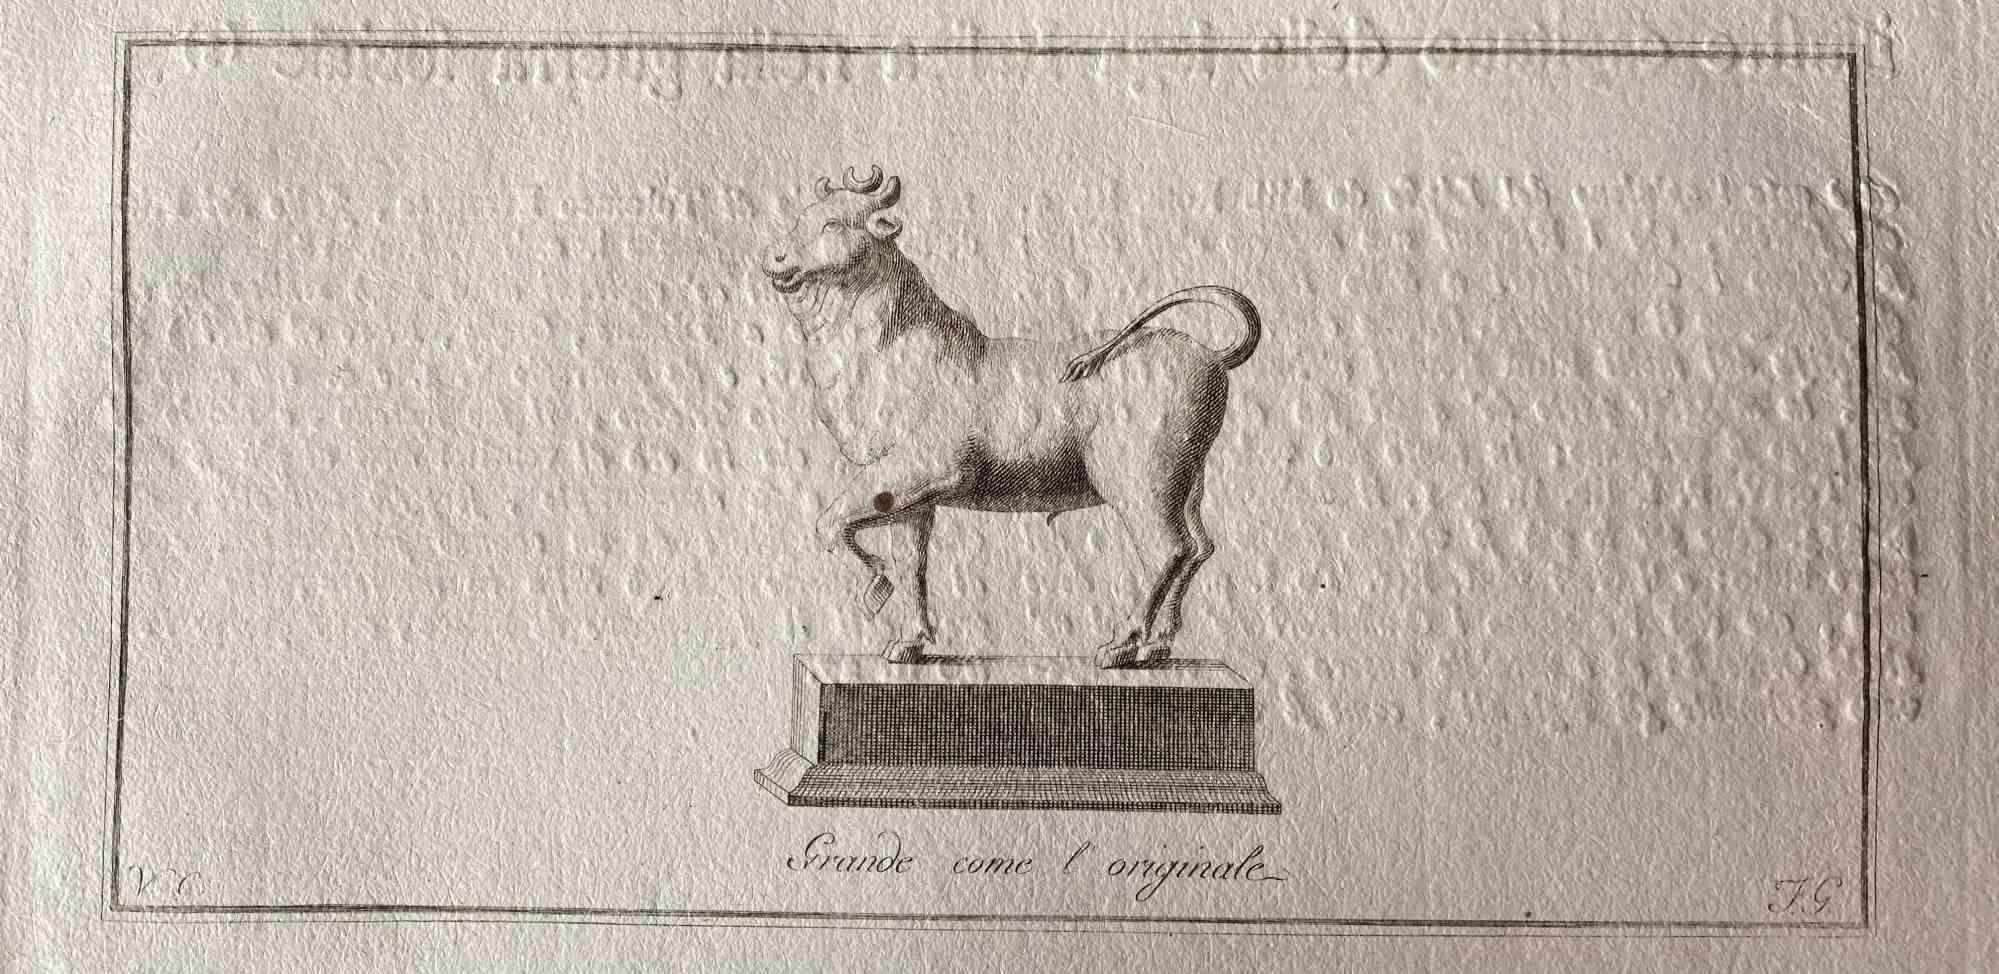 Animal Figures from Ancient Rome, from the Series "The Antiquities of Herculaneum Exposed", is anoriginal etching from the end of the 18th century, made by Various Old Masters.

In very good condition, except for some stains along the margins.

In